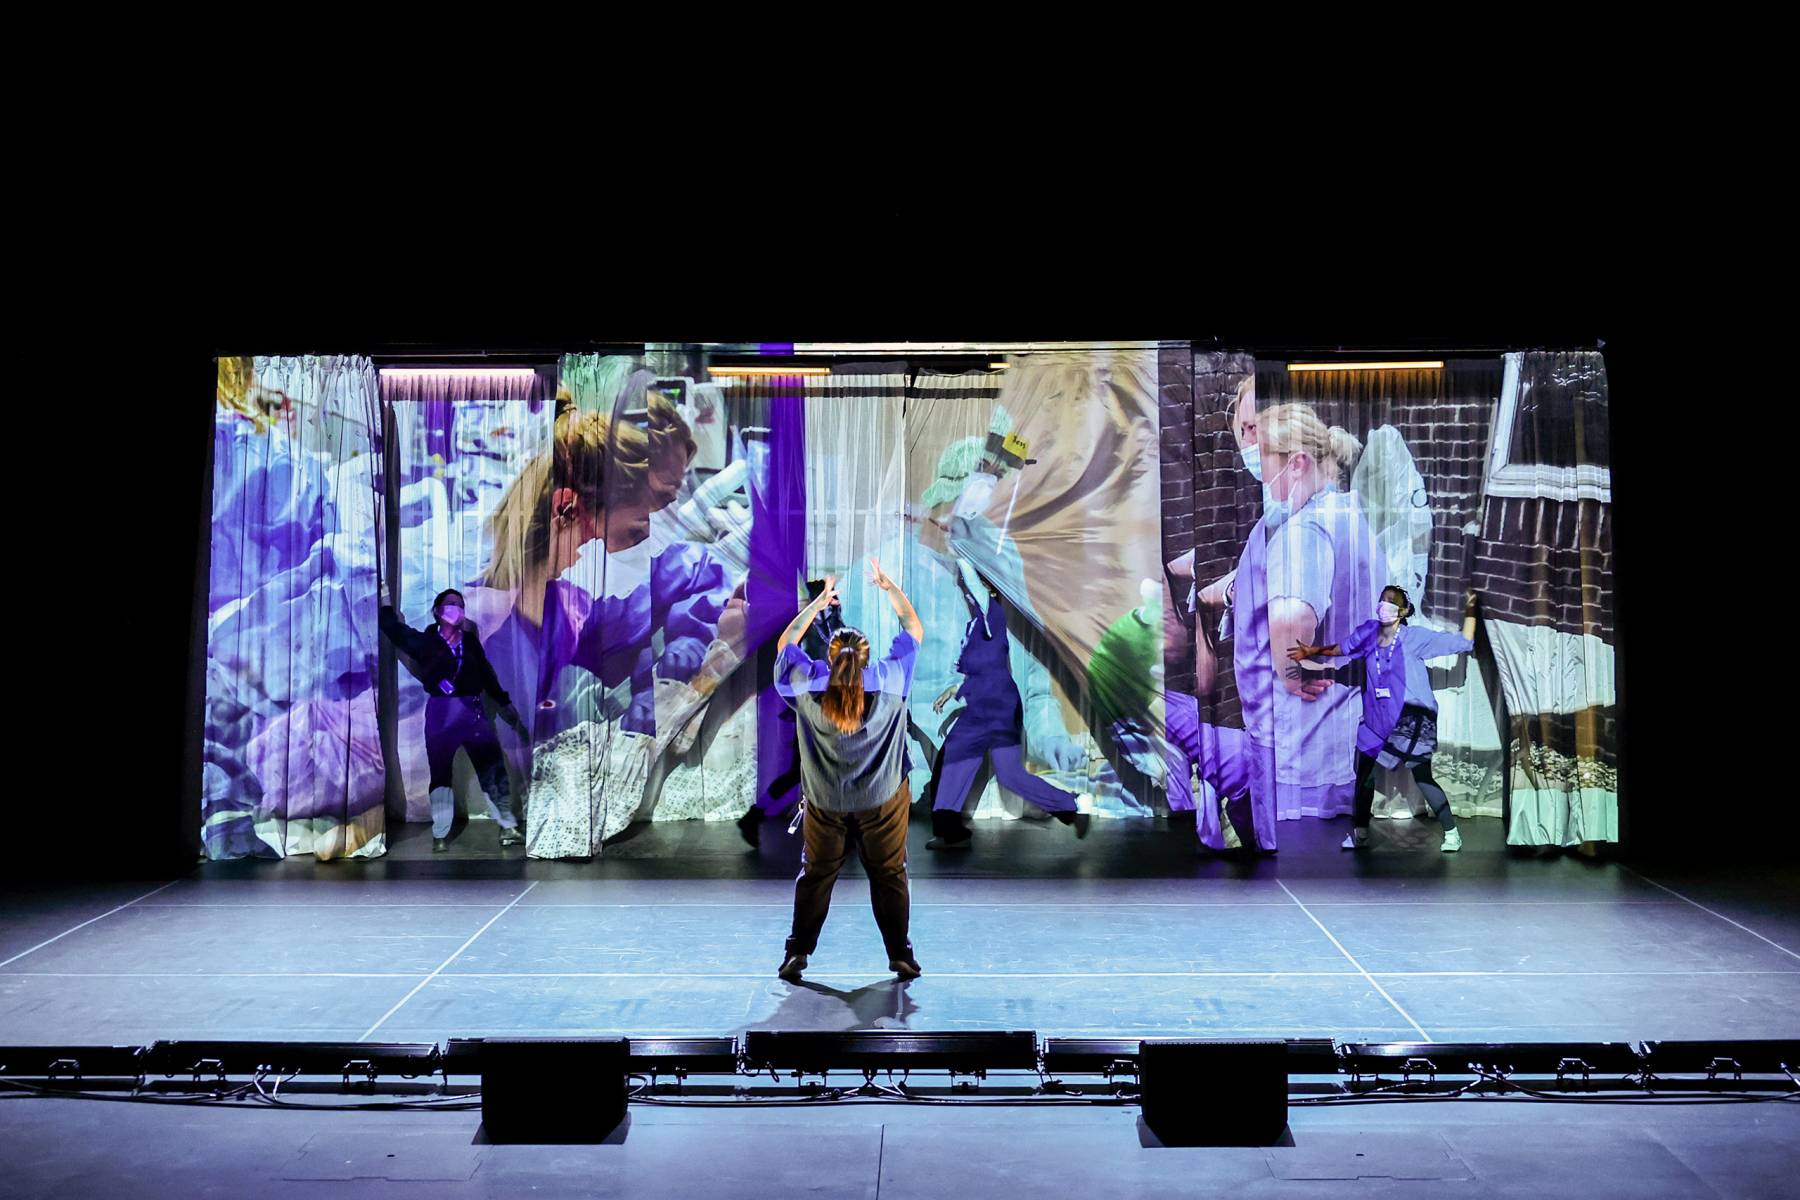 performer on stage with vibrant background projections